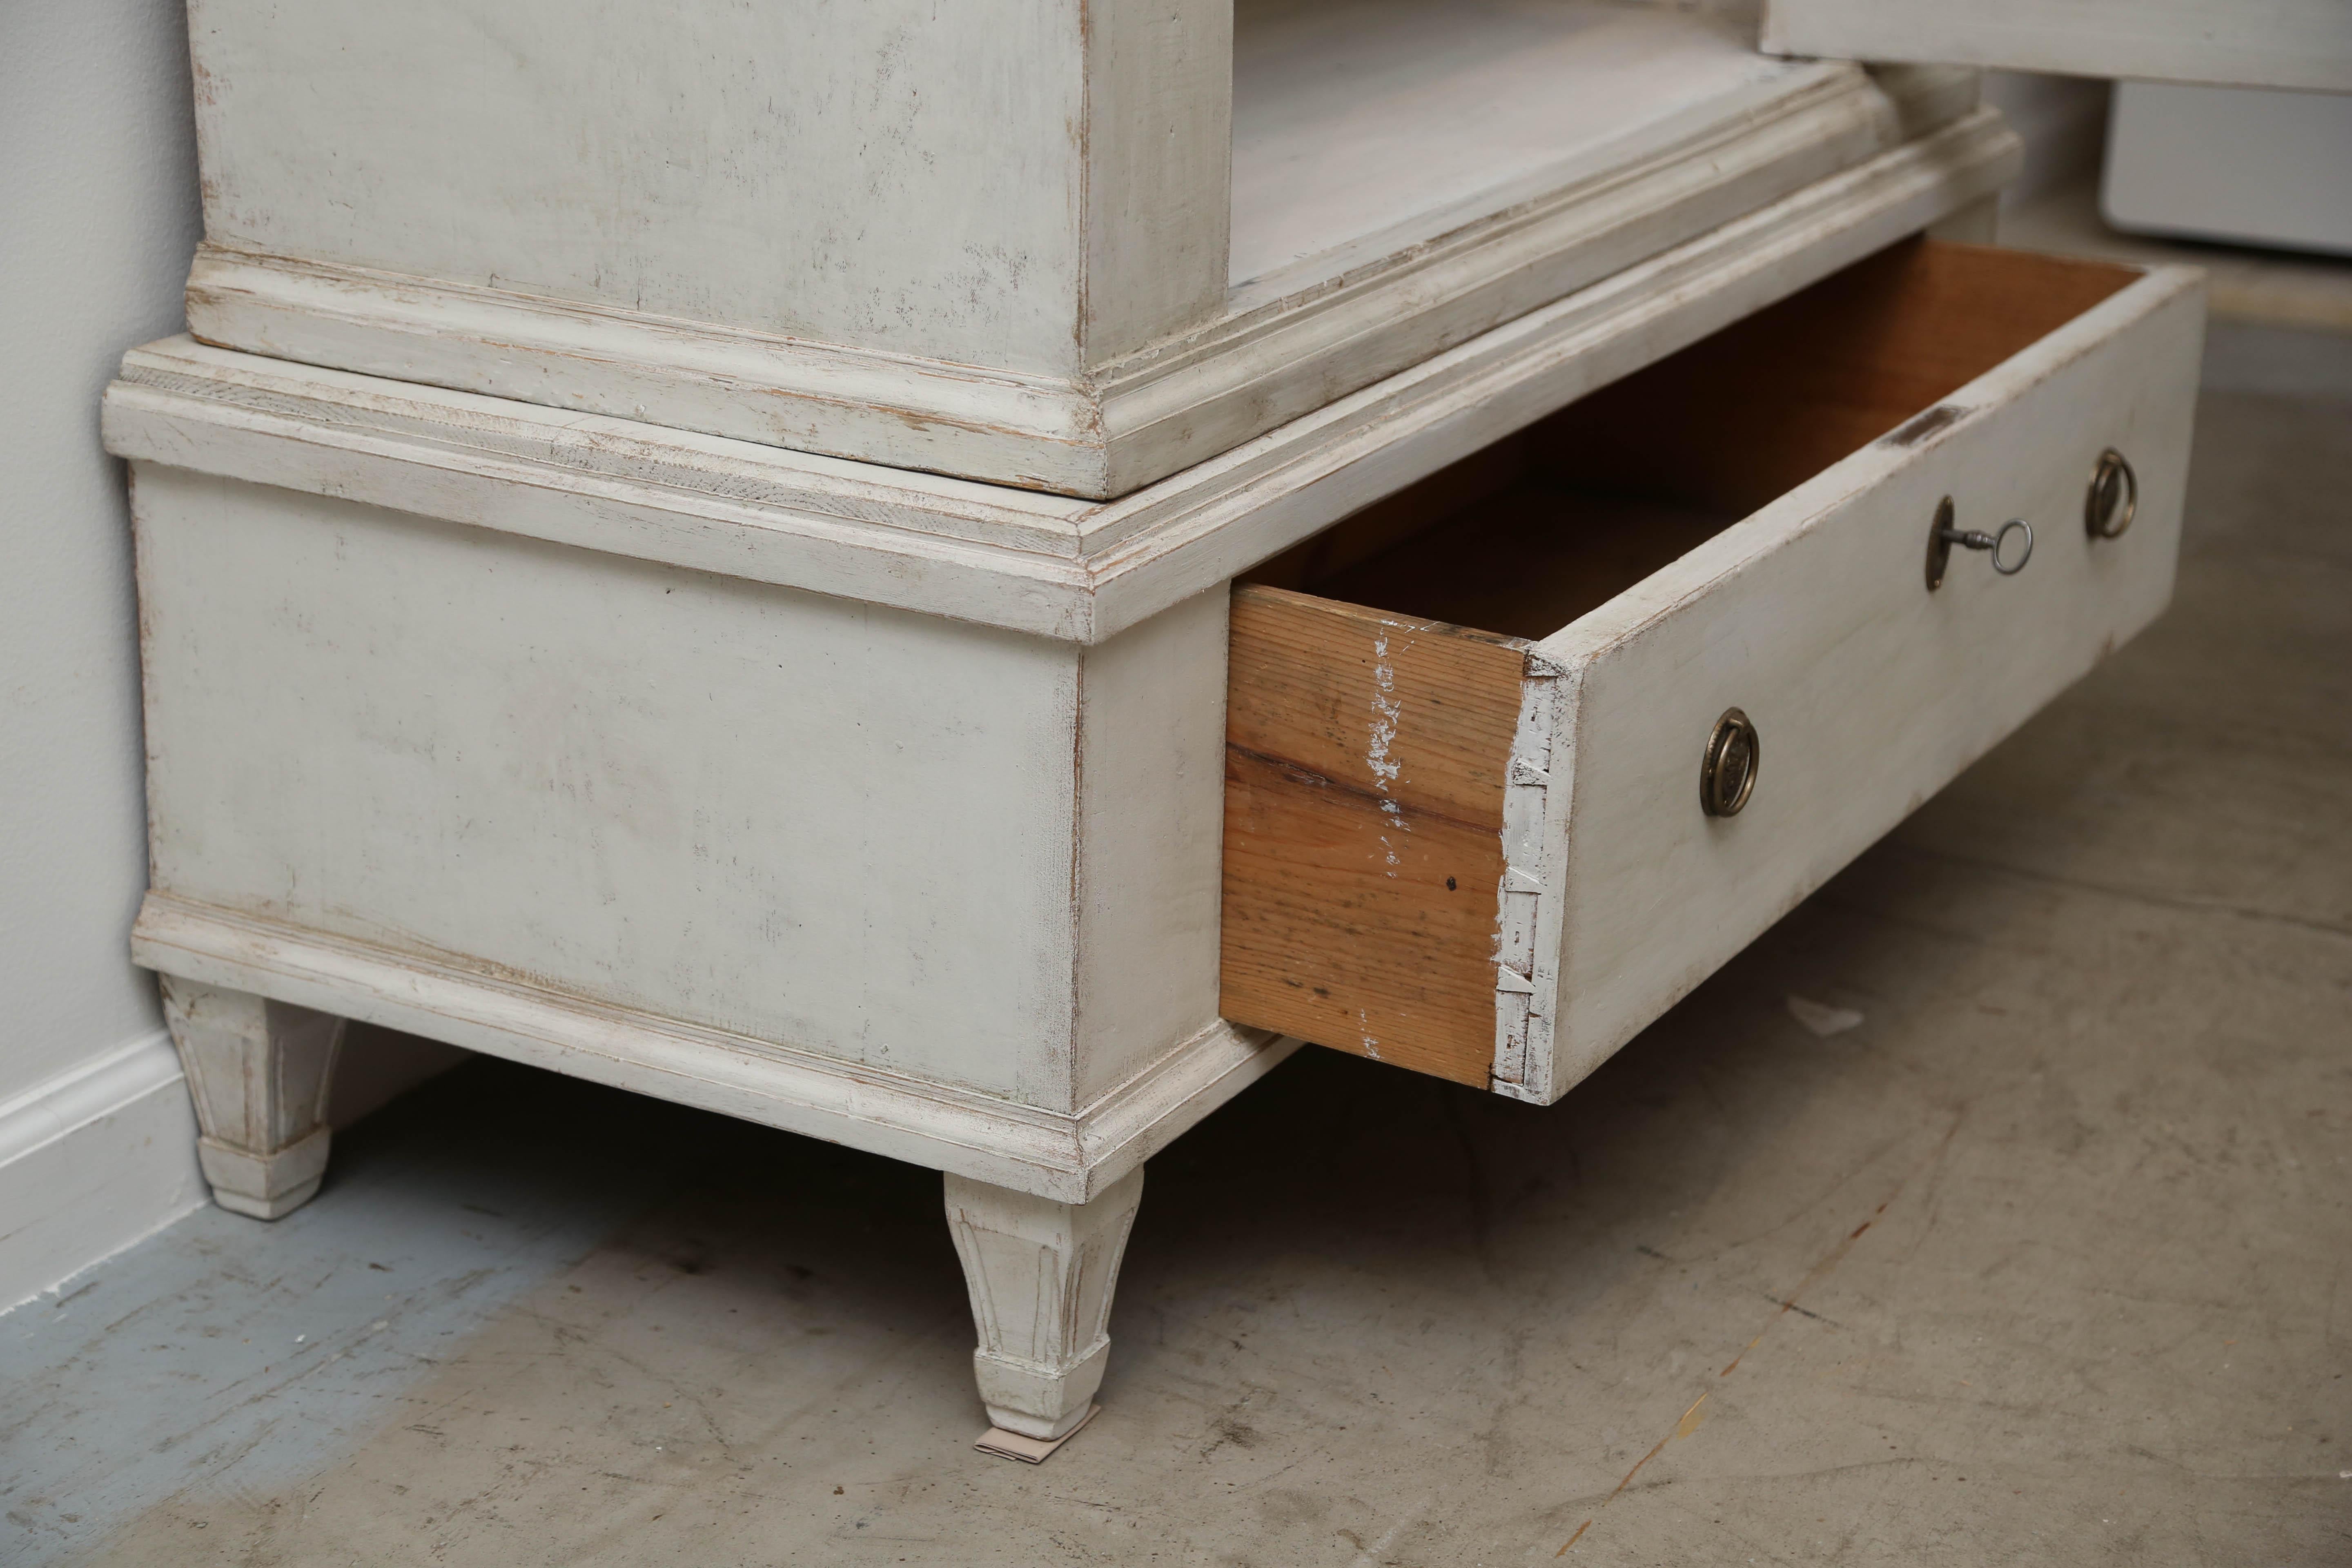 Antique Swedish Gustavian style cabinet painted distressed Swedish white color. Lovely carved crown molding. One raised panel original glass door with lock and key. Cabinet sits on a raised base with fluted legs and one drawer that includes it's own